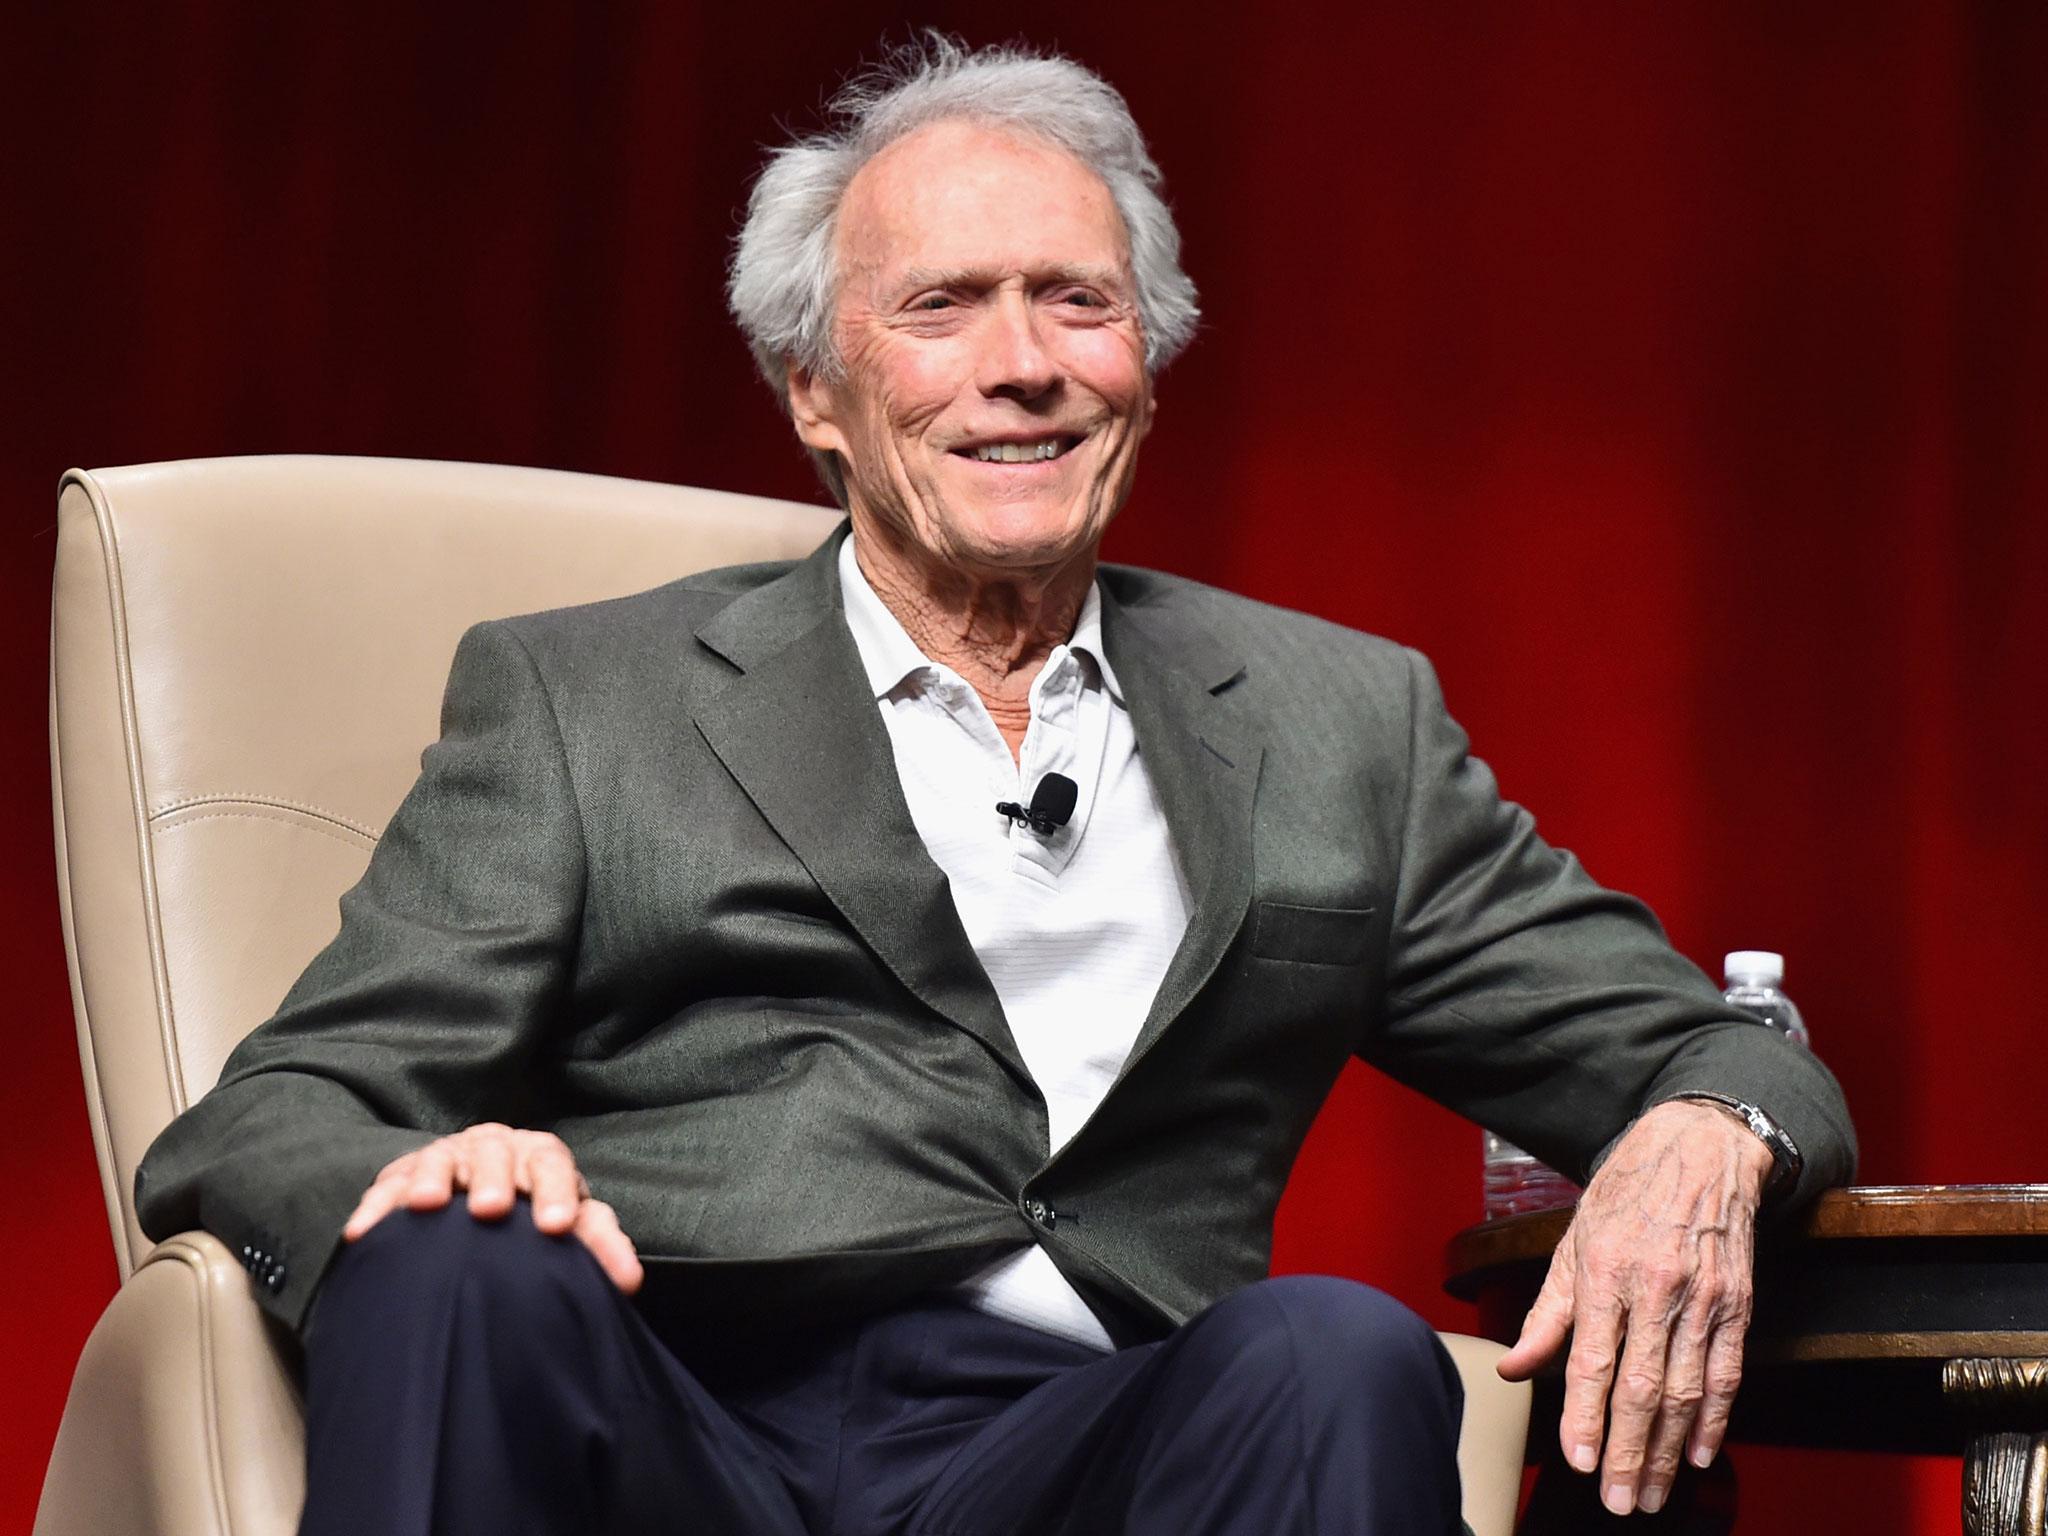 Clint Eastwood is the latest white actor to give a controversial take on the #OscarsSoWhite backlash.